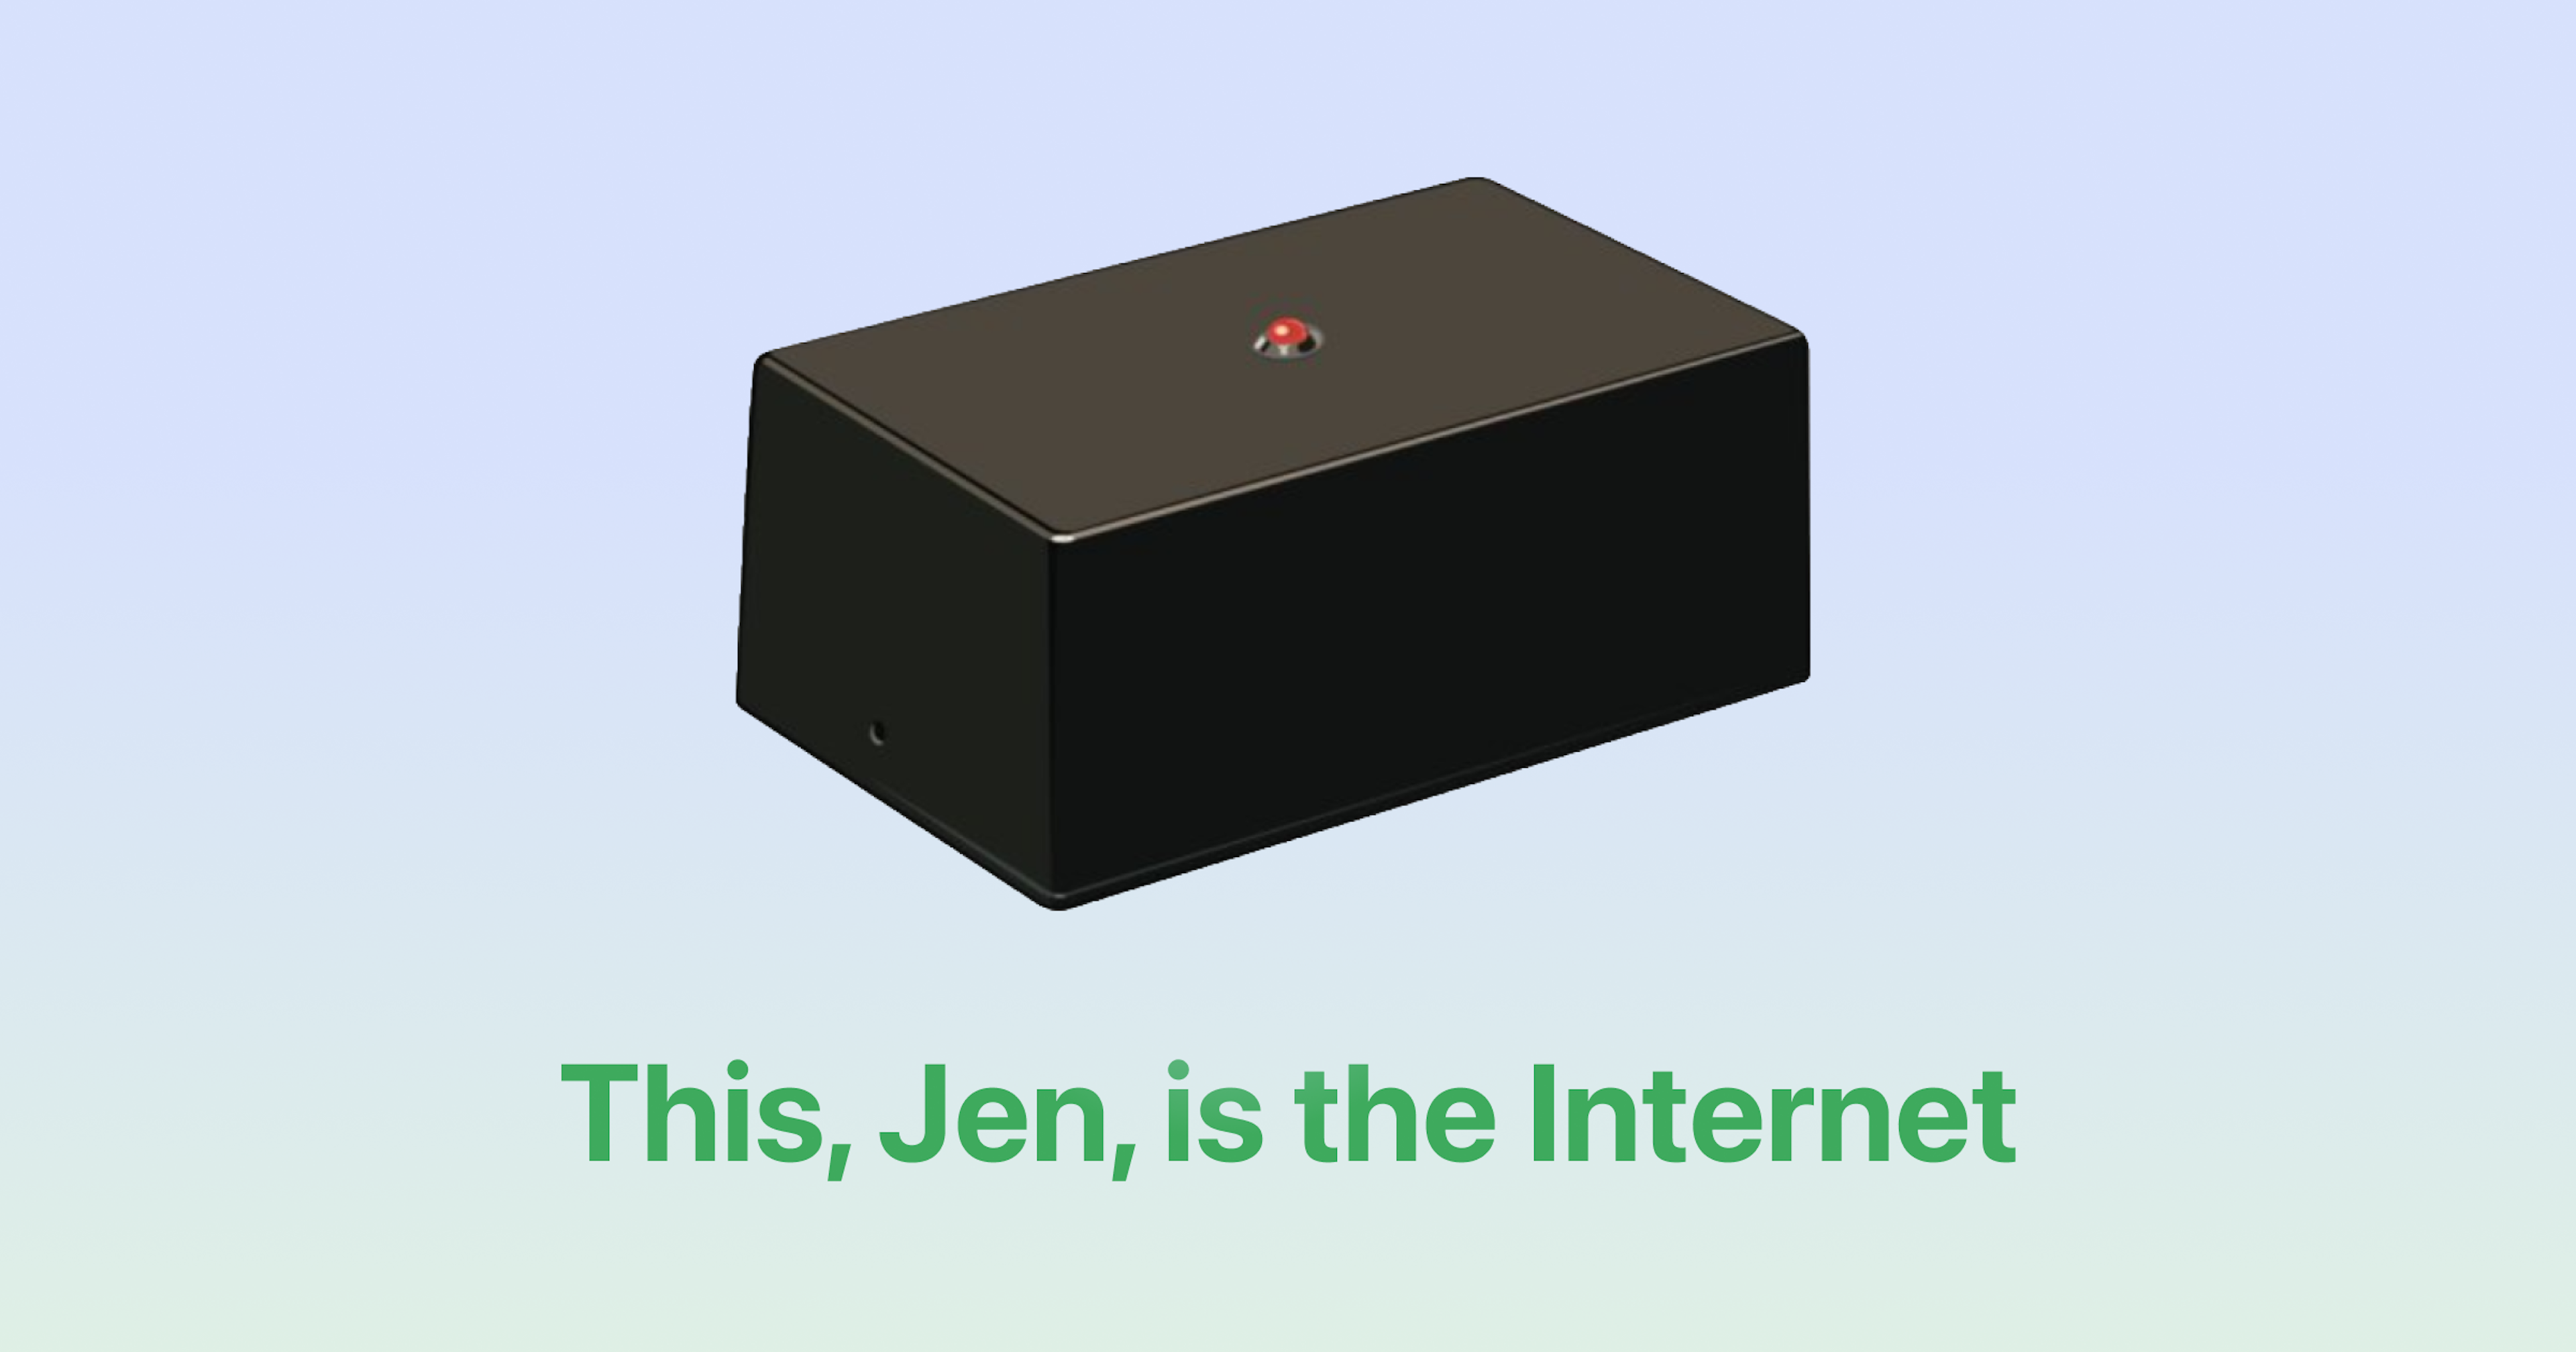 IT crowd - This, Jen, is the Internet